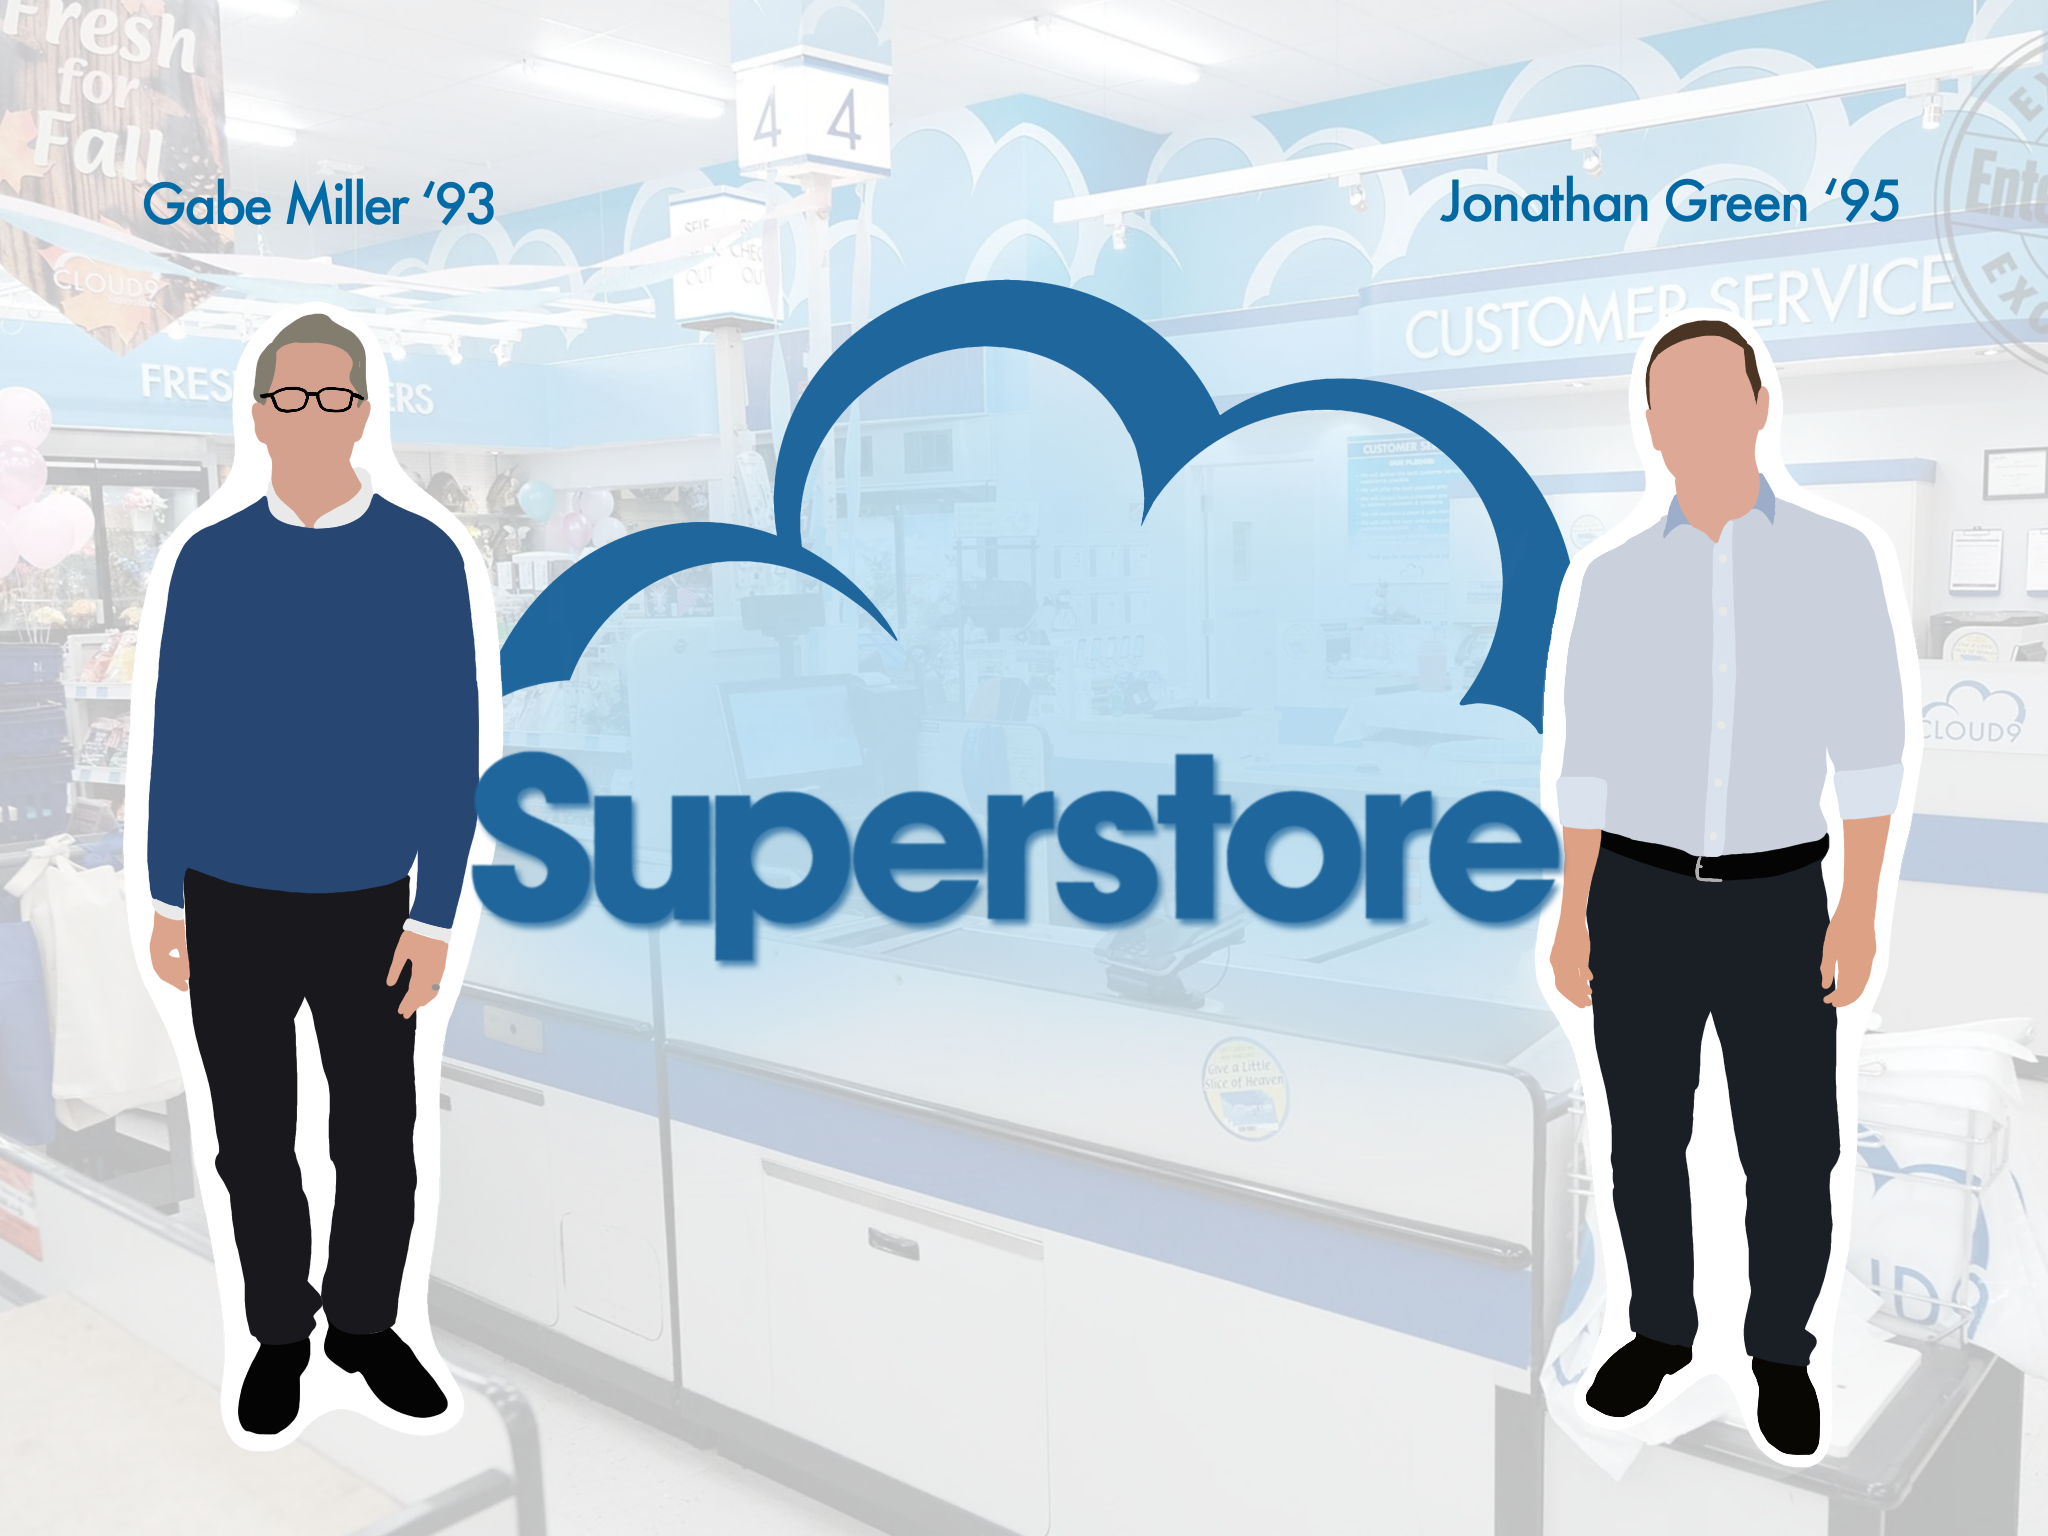 Graphic of Gabe Miller and Jonathan Green standing in front of the 'Superstore' logo